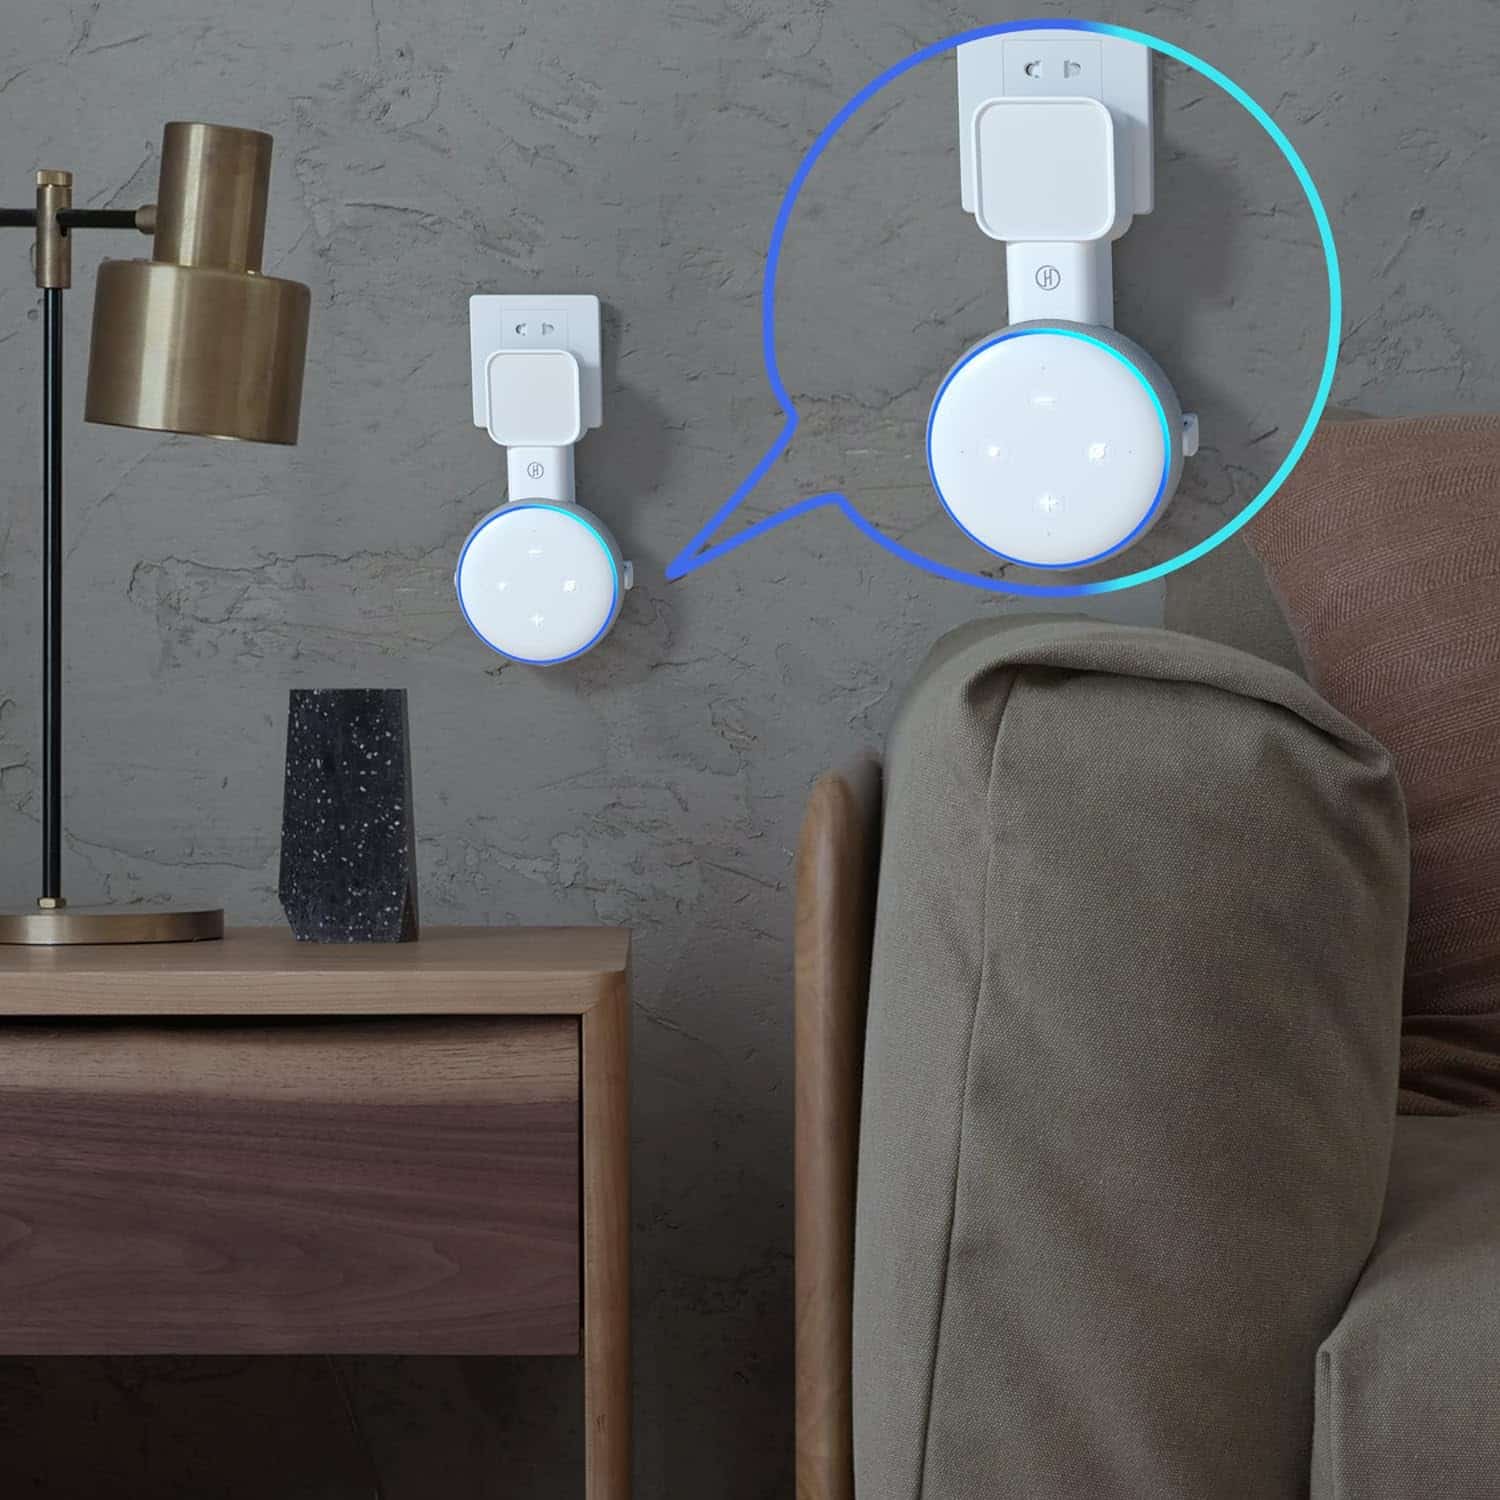 Revolutionize Your Smart Home Experience with the Heardear Outlet Wall Mount Holder for Echo Dot 3rd Generation